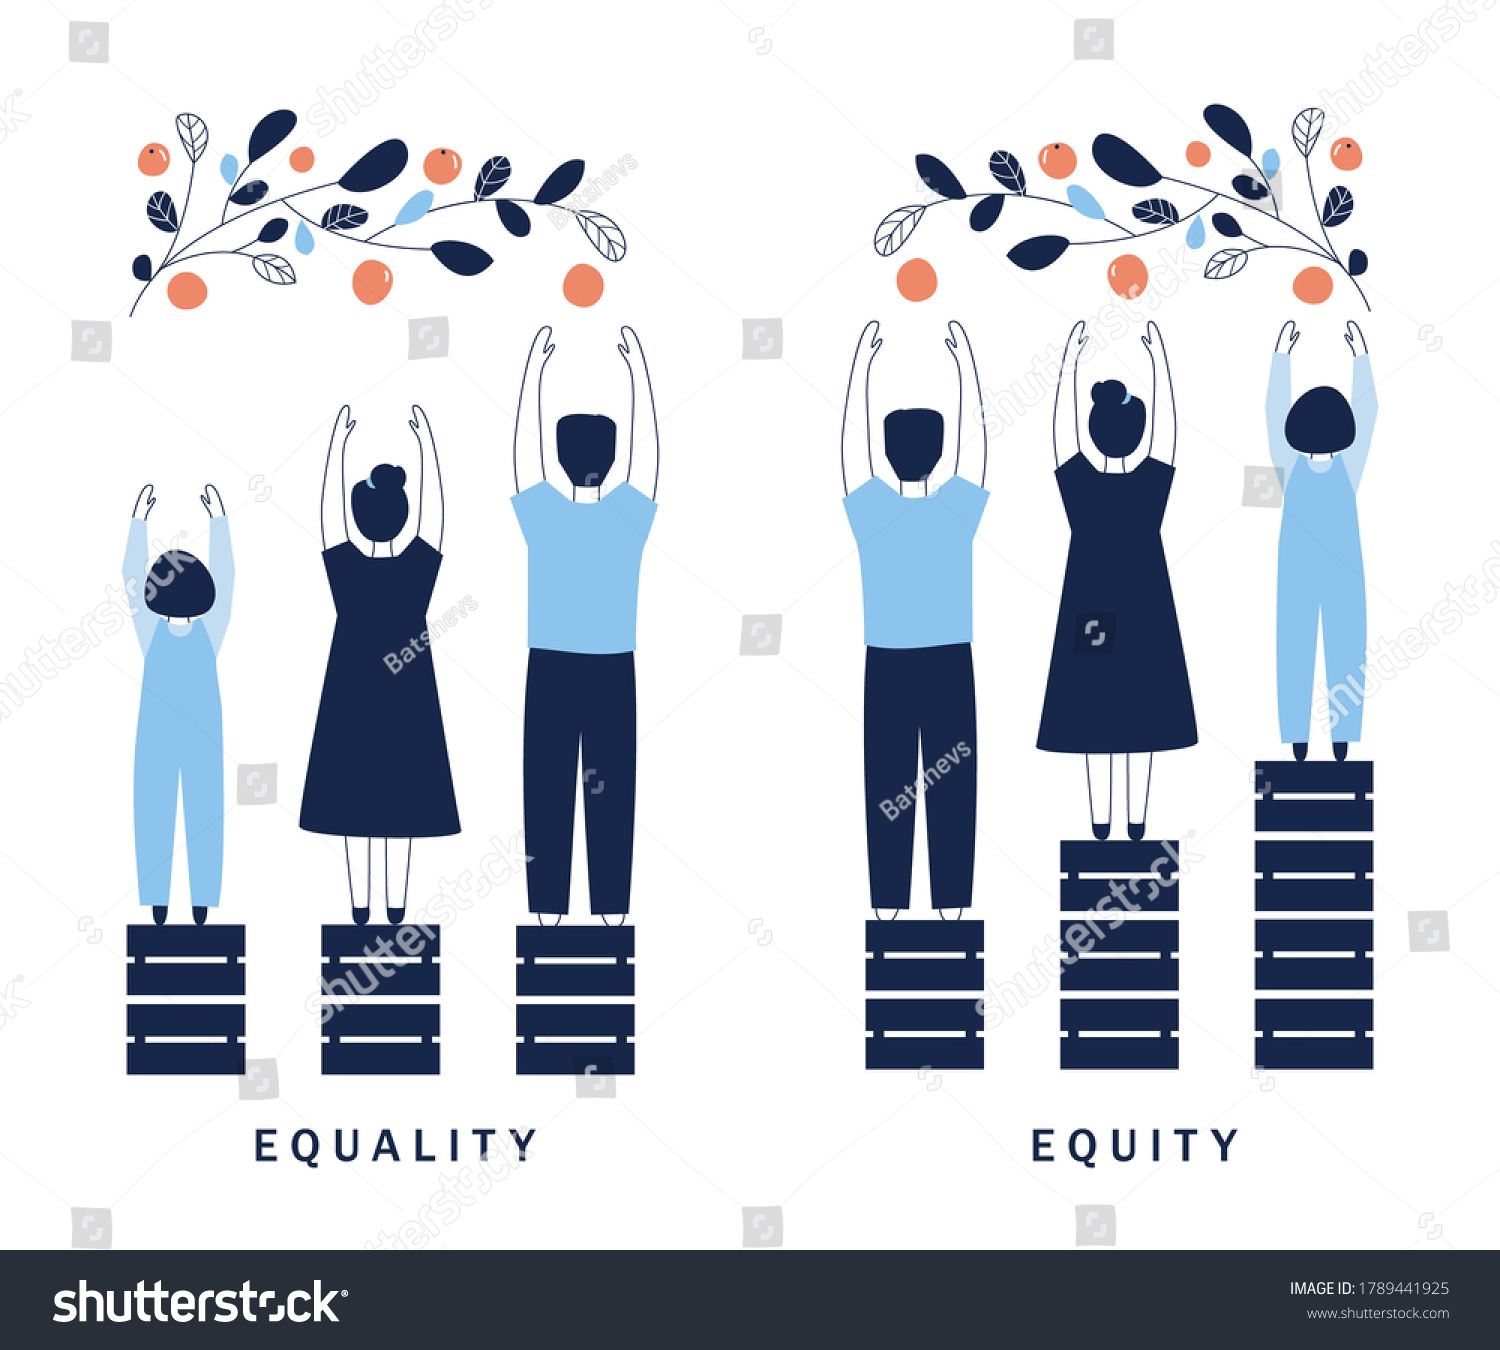 Equality Equity Concept Illustration Human Rights Stock Vector Royalty Free